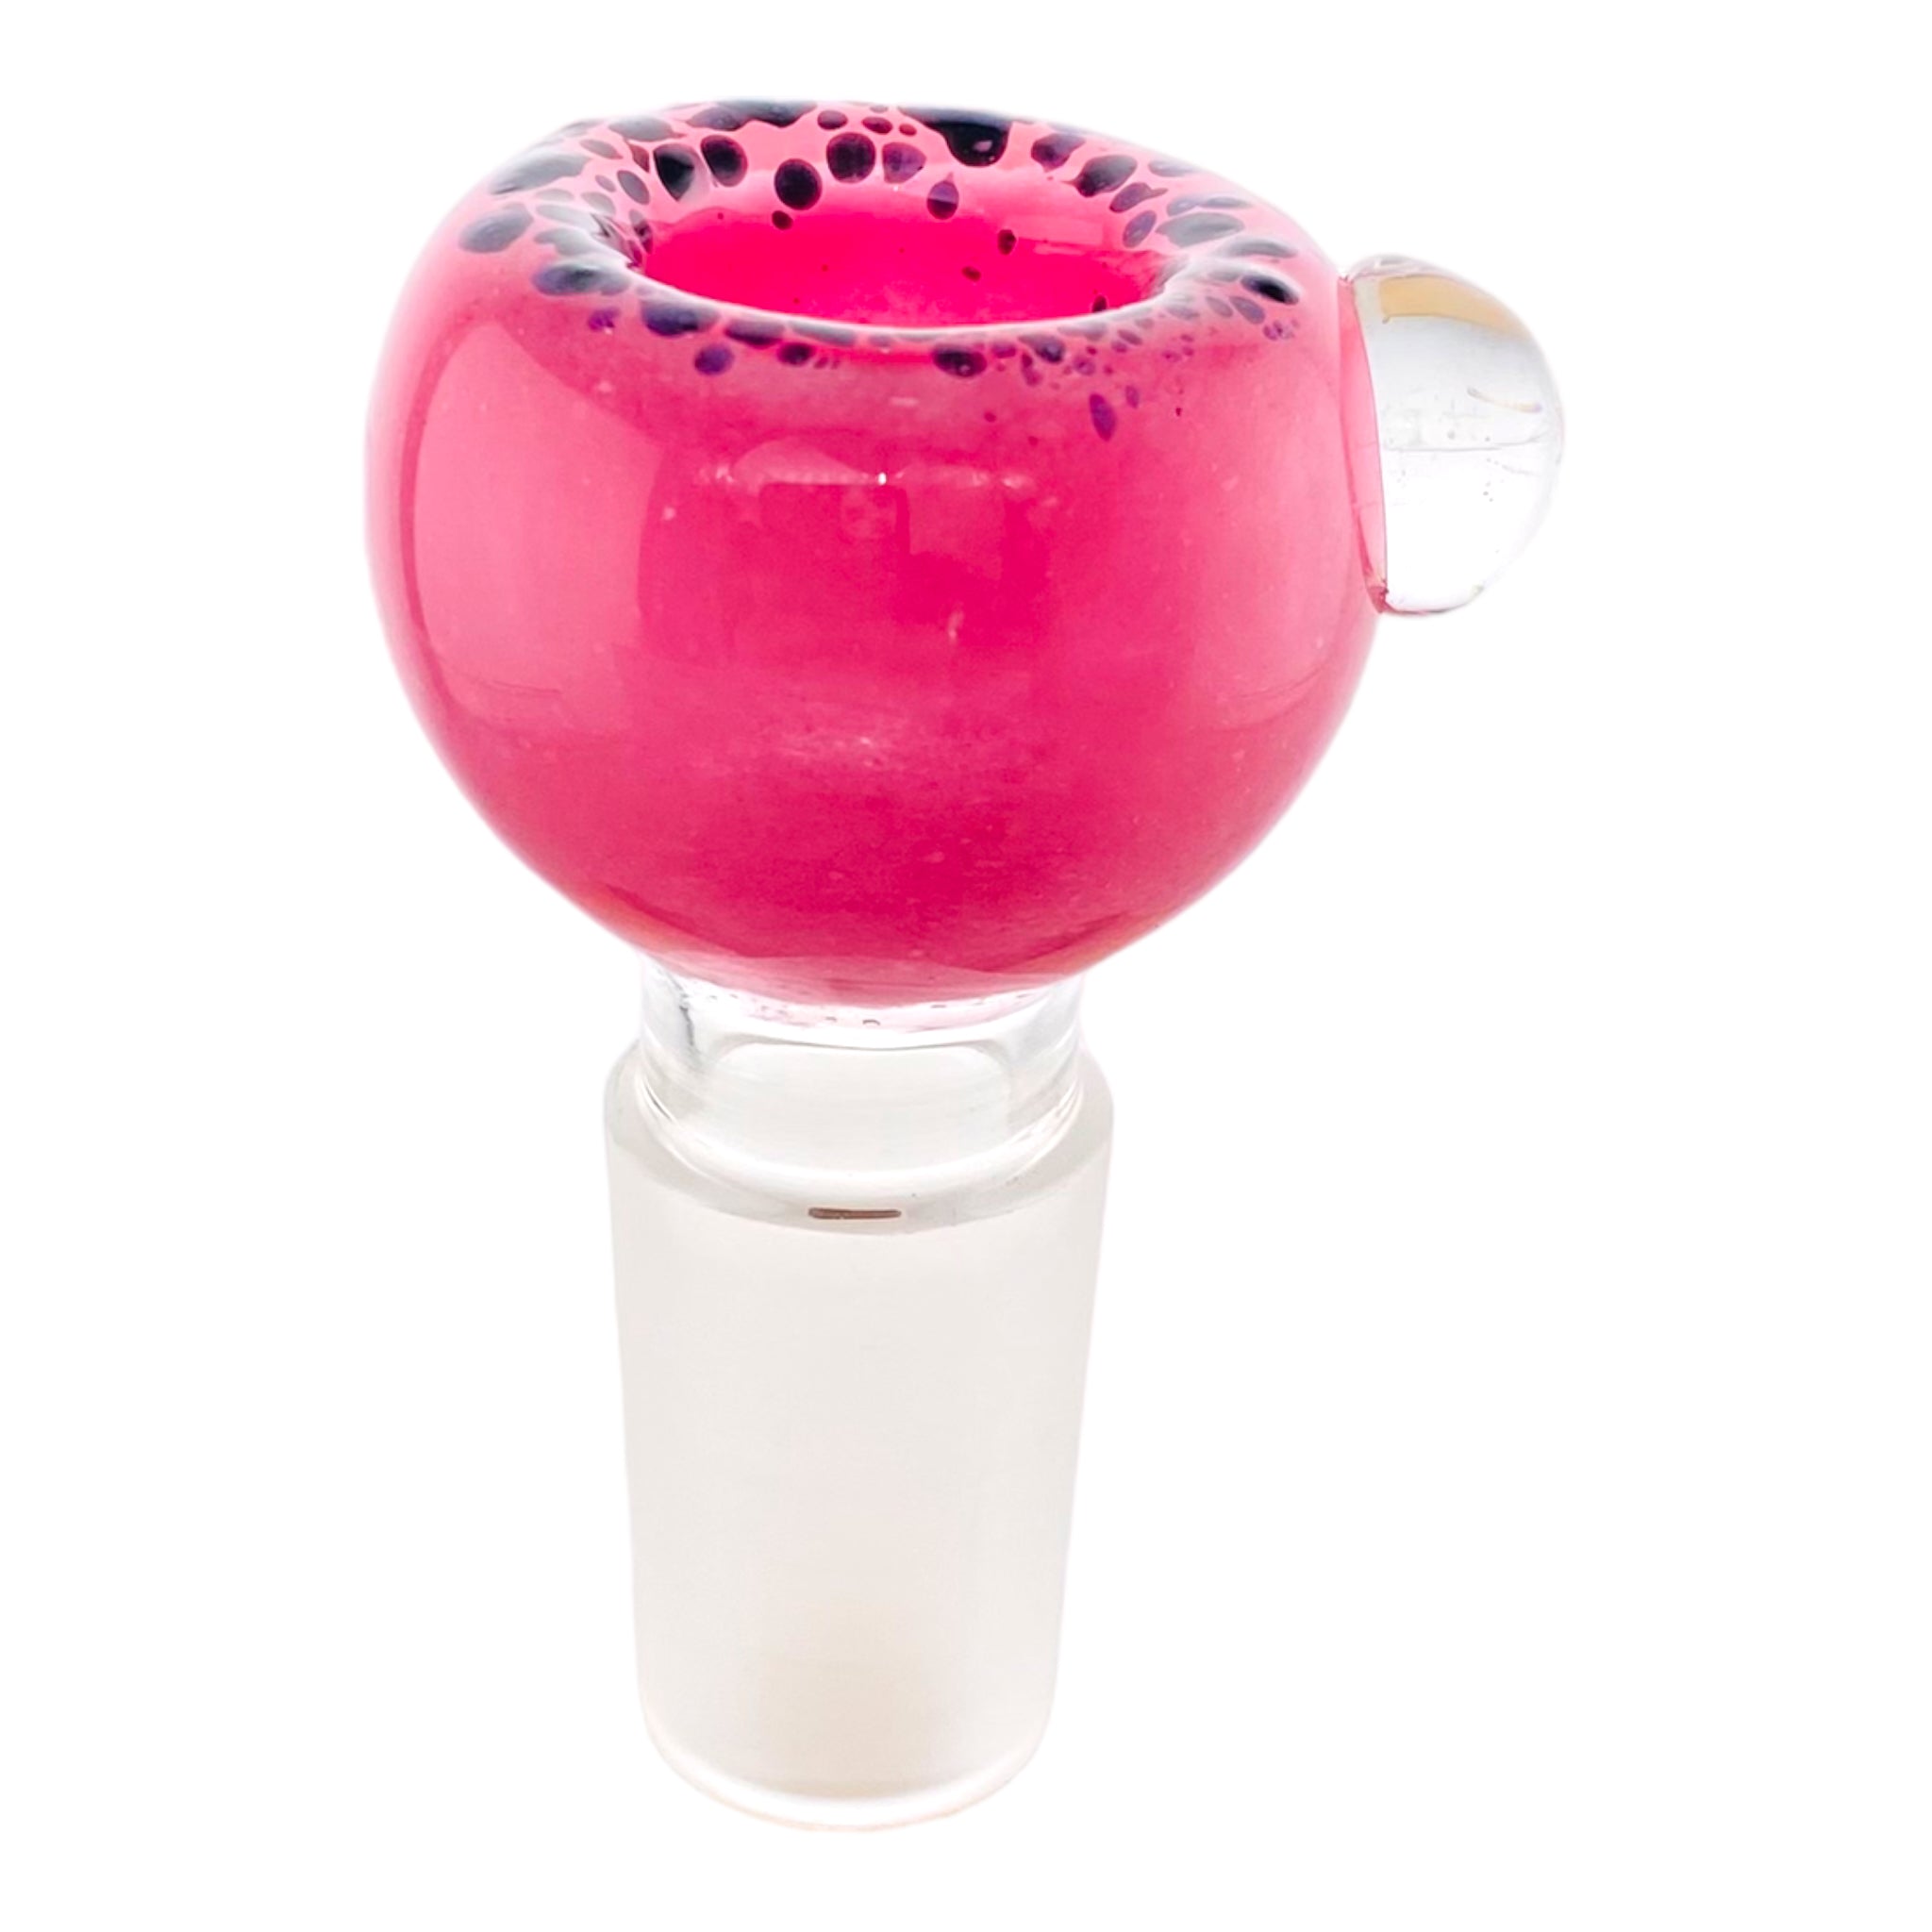 18mm Flower Bowl - Bubble With Frosted Rim Bong Bowl Piece - Pink